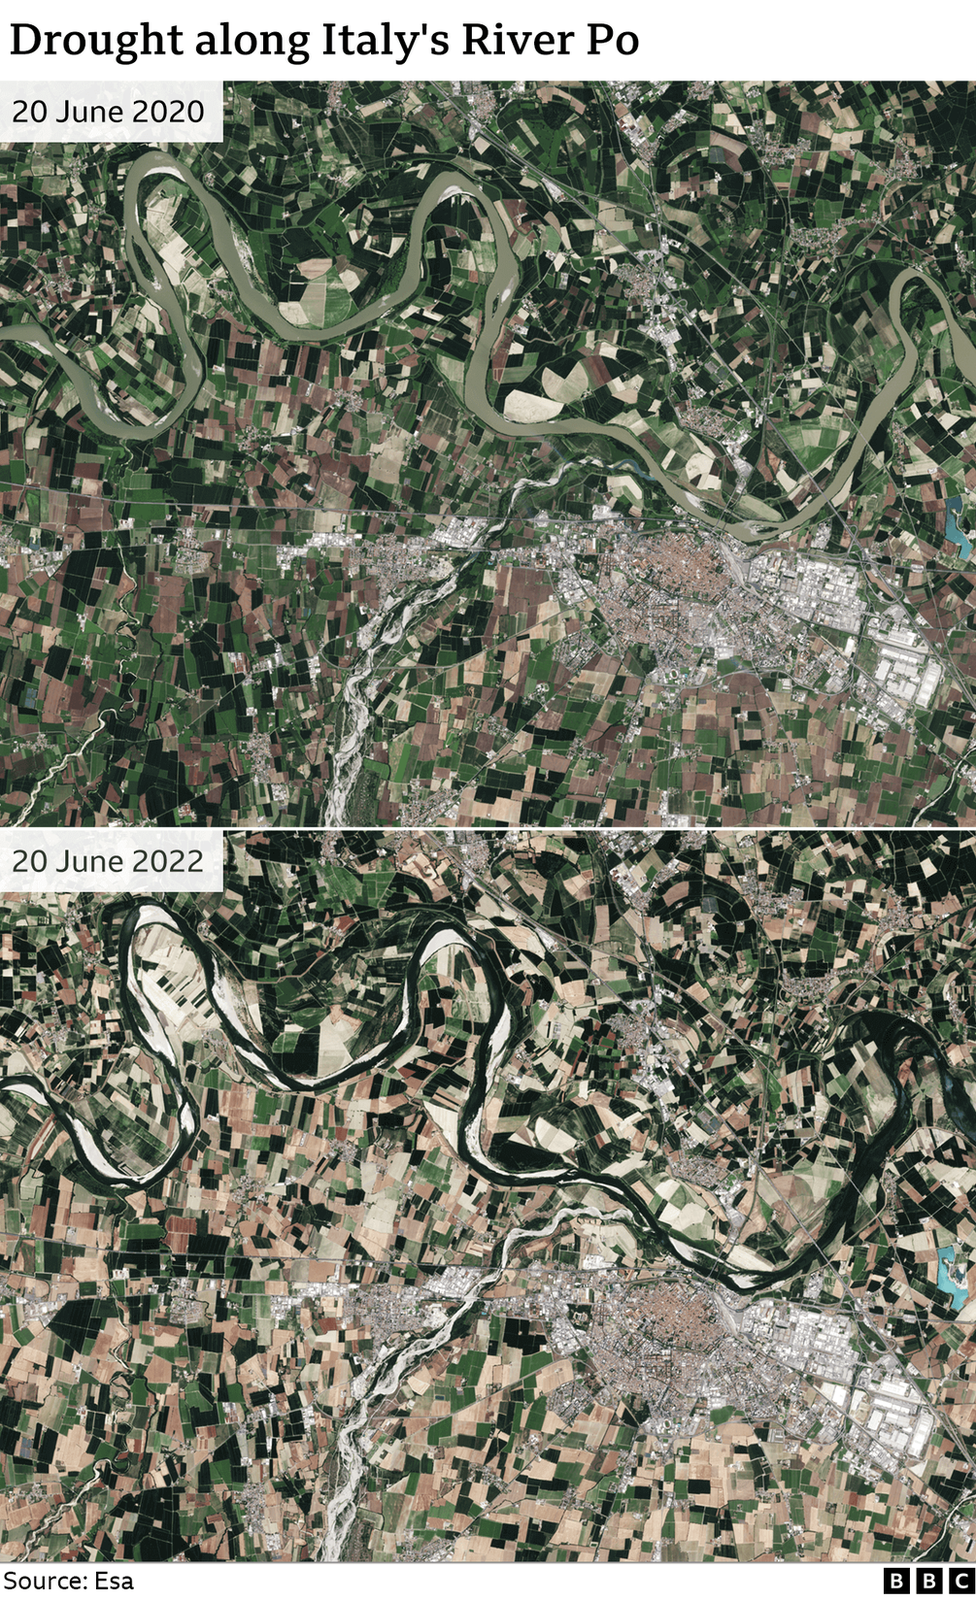 Satellite images show the effects of drought along the River Po in northern Italy